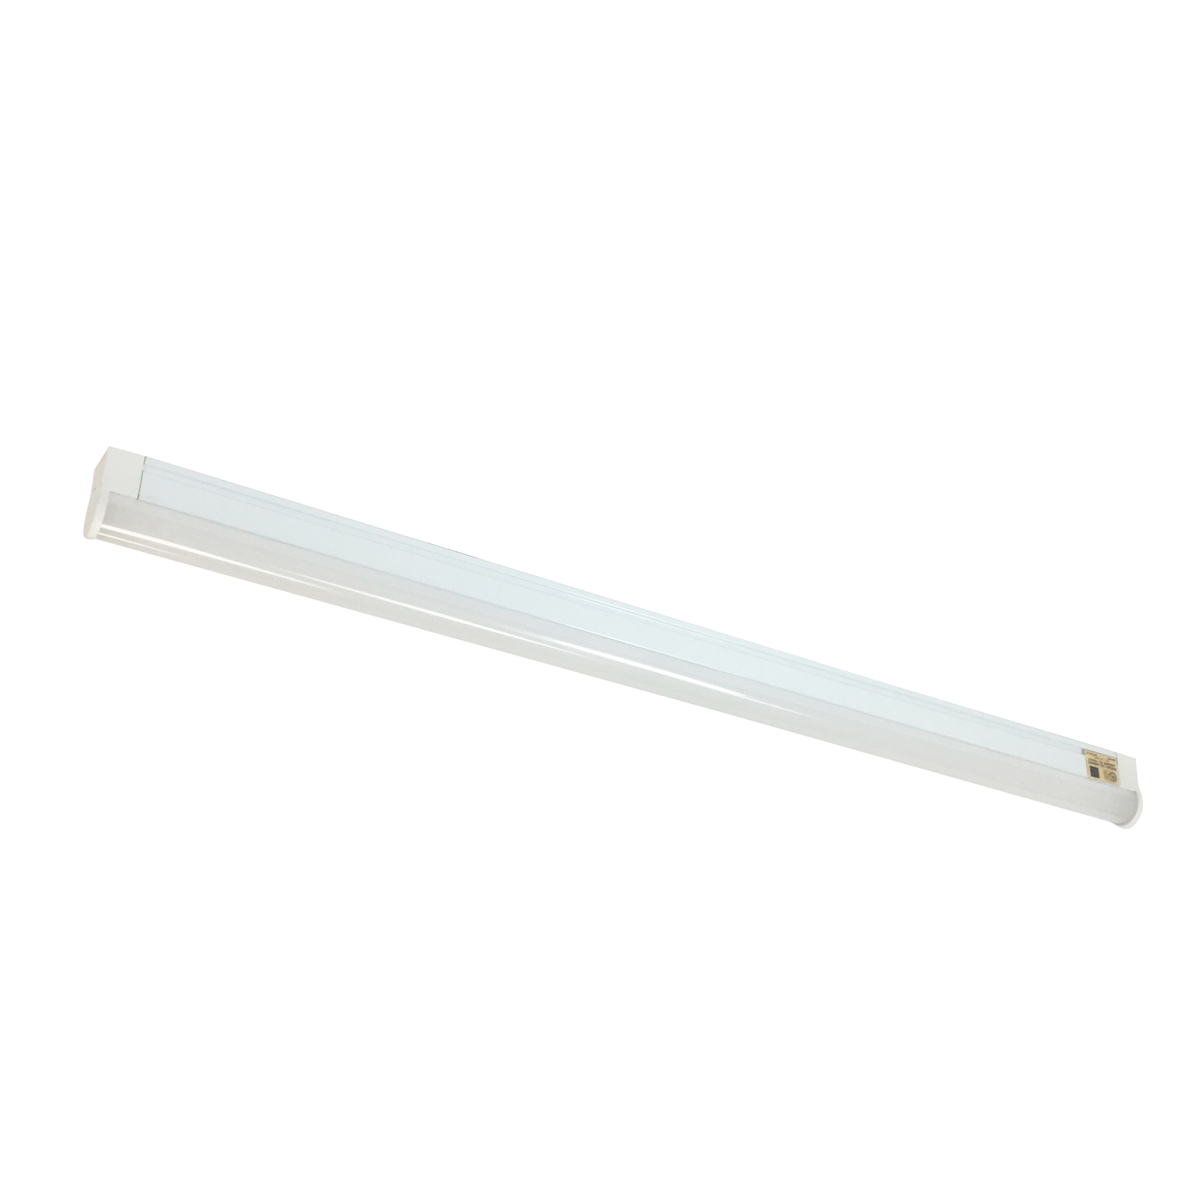 Picture of Nora Lighting NULS-LED1040W 10 in. 4000K Undercabinet Linear LED Fixture - White